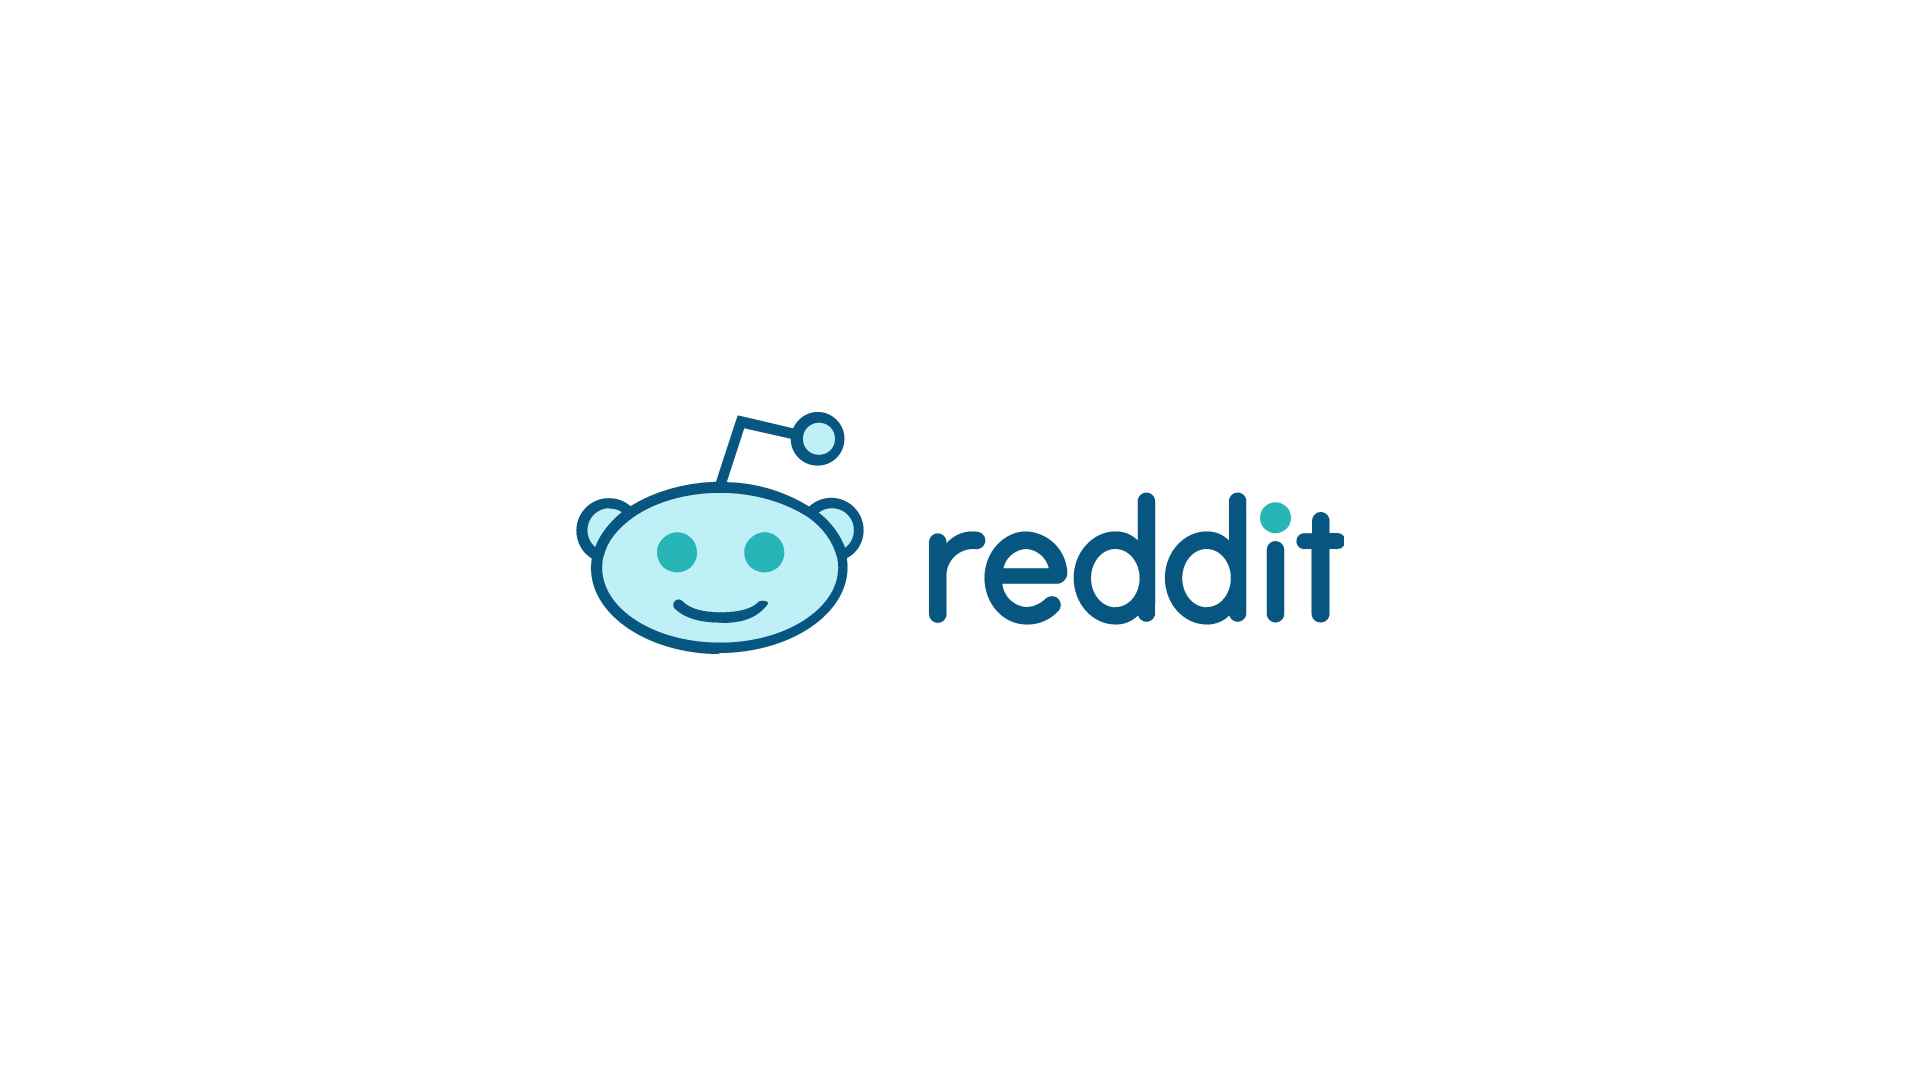 Are there any age restrictions or guidelines for using Reddit?